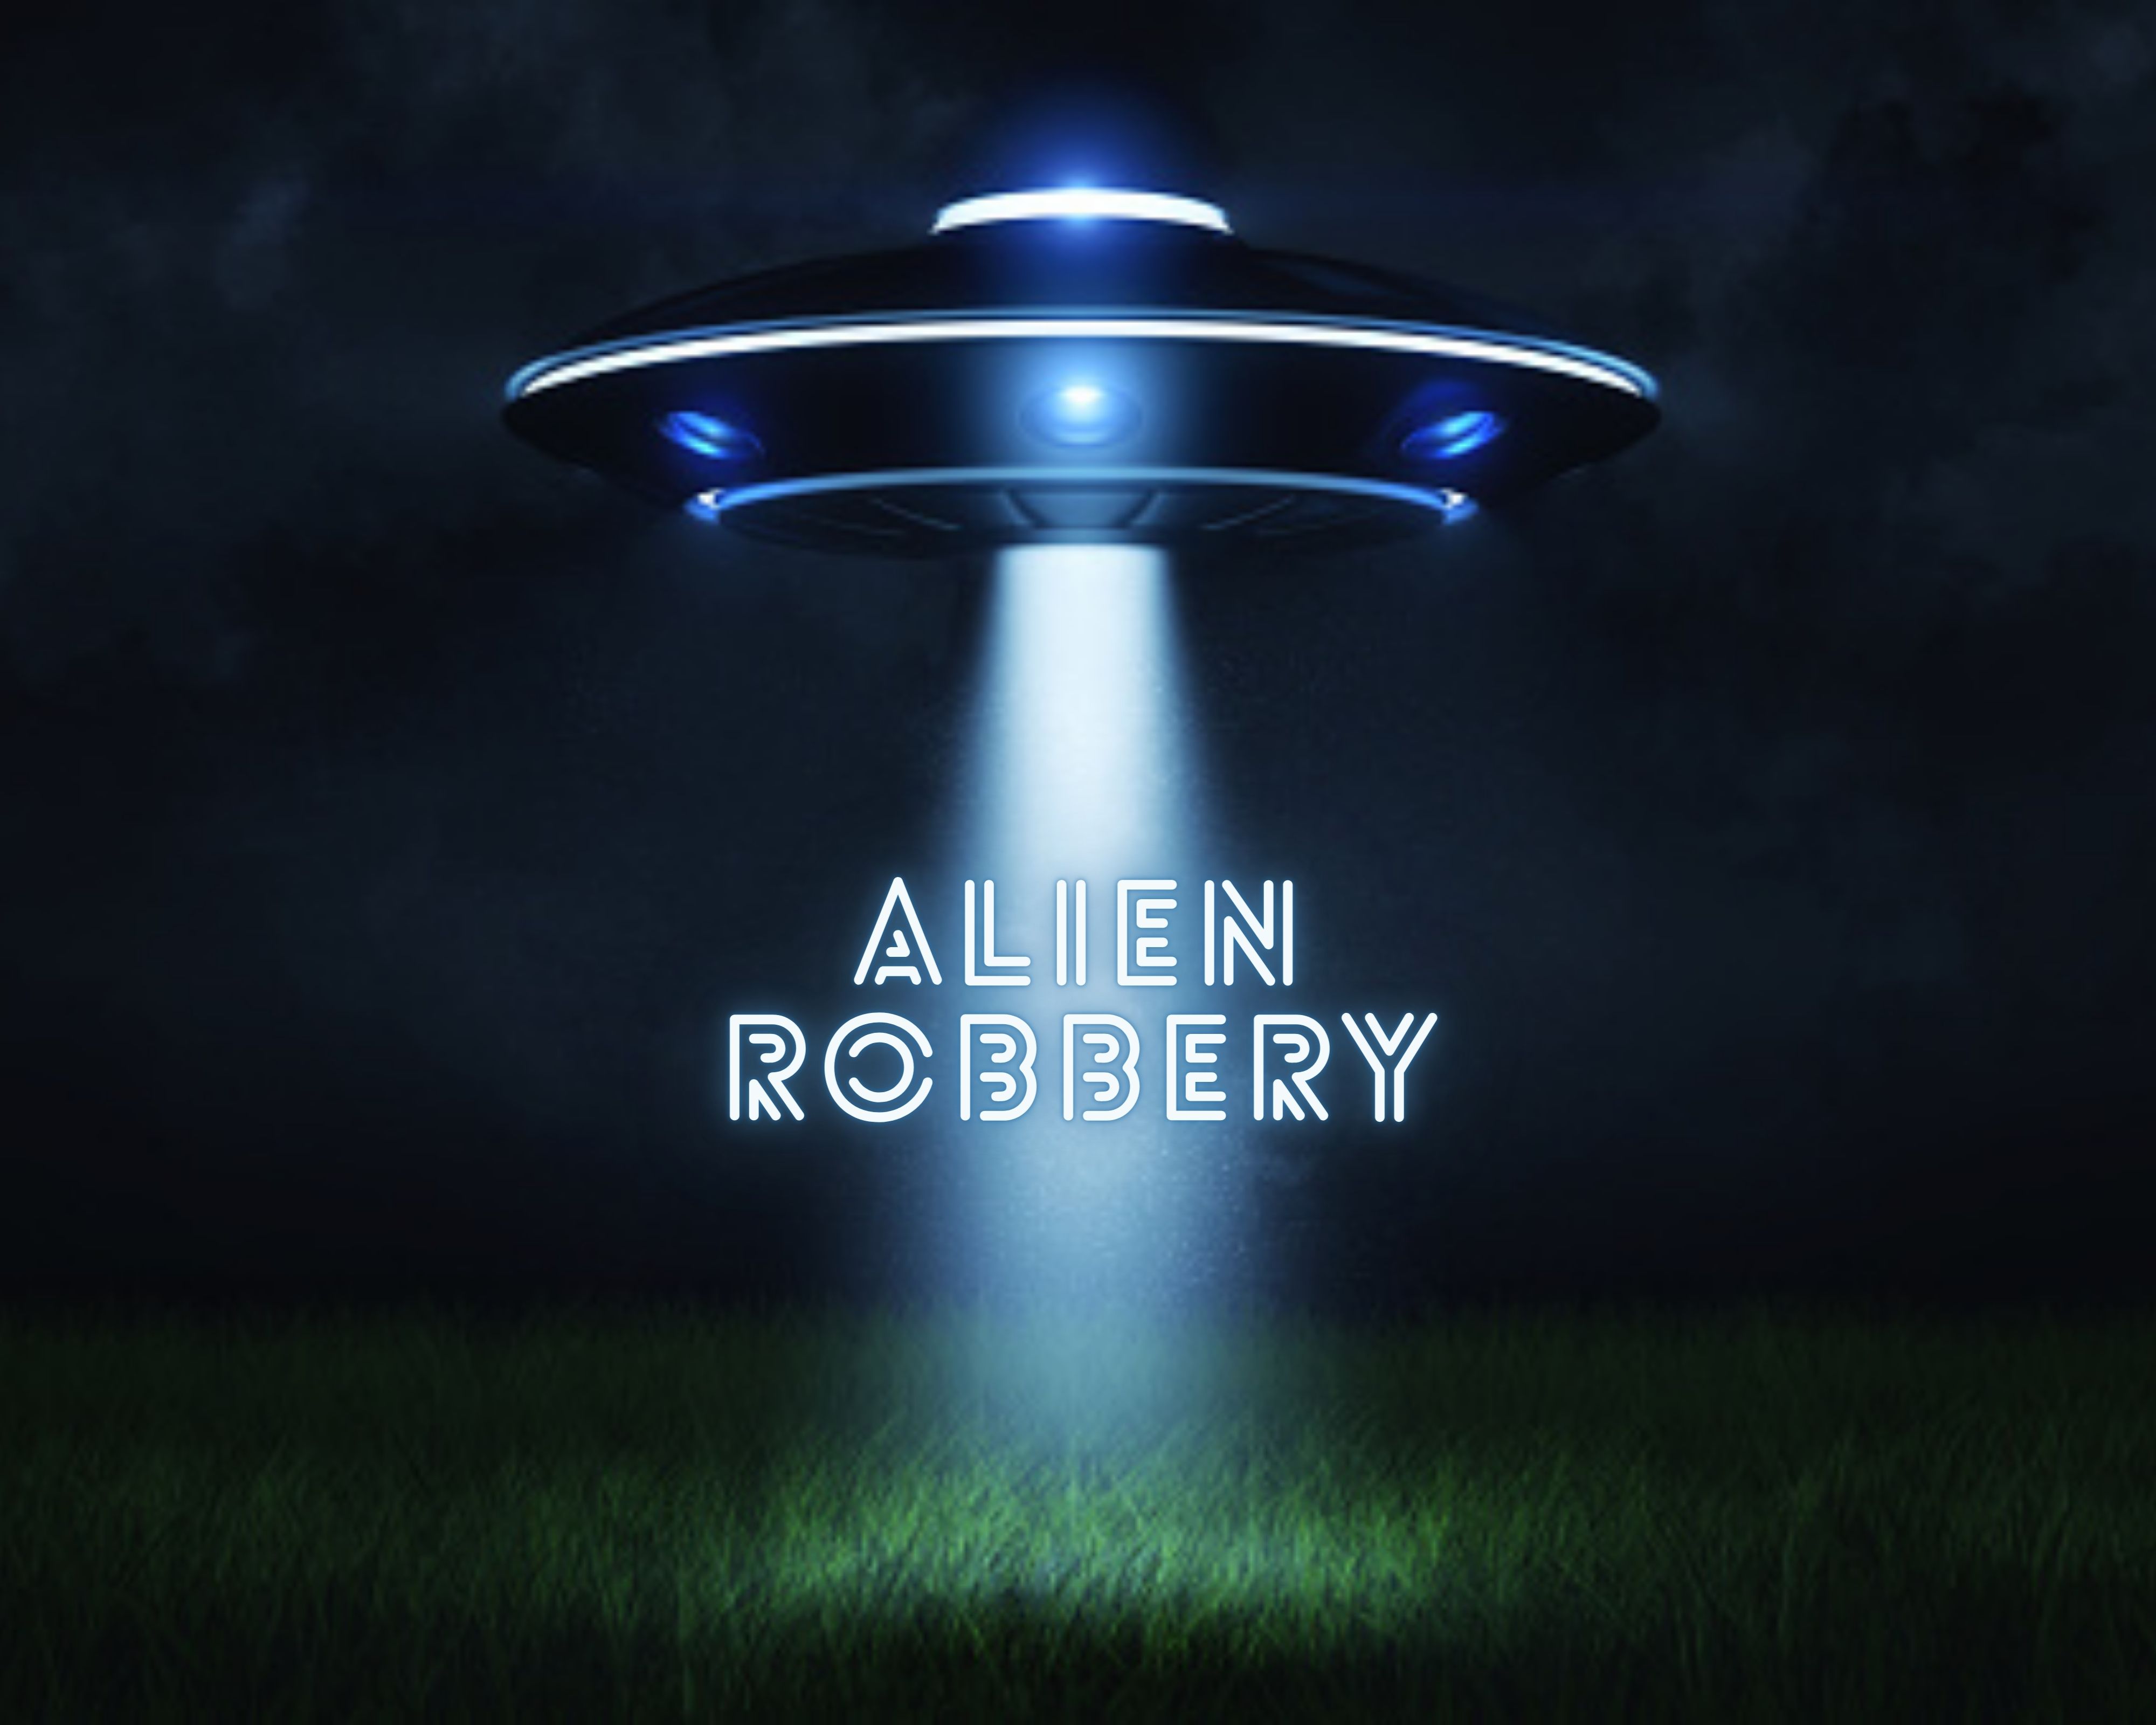 Alien Robbery - Collection | OpenSea